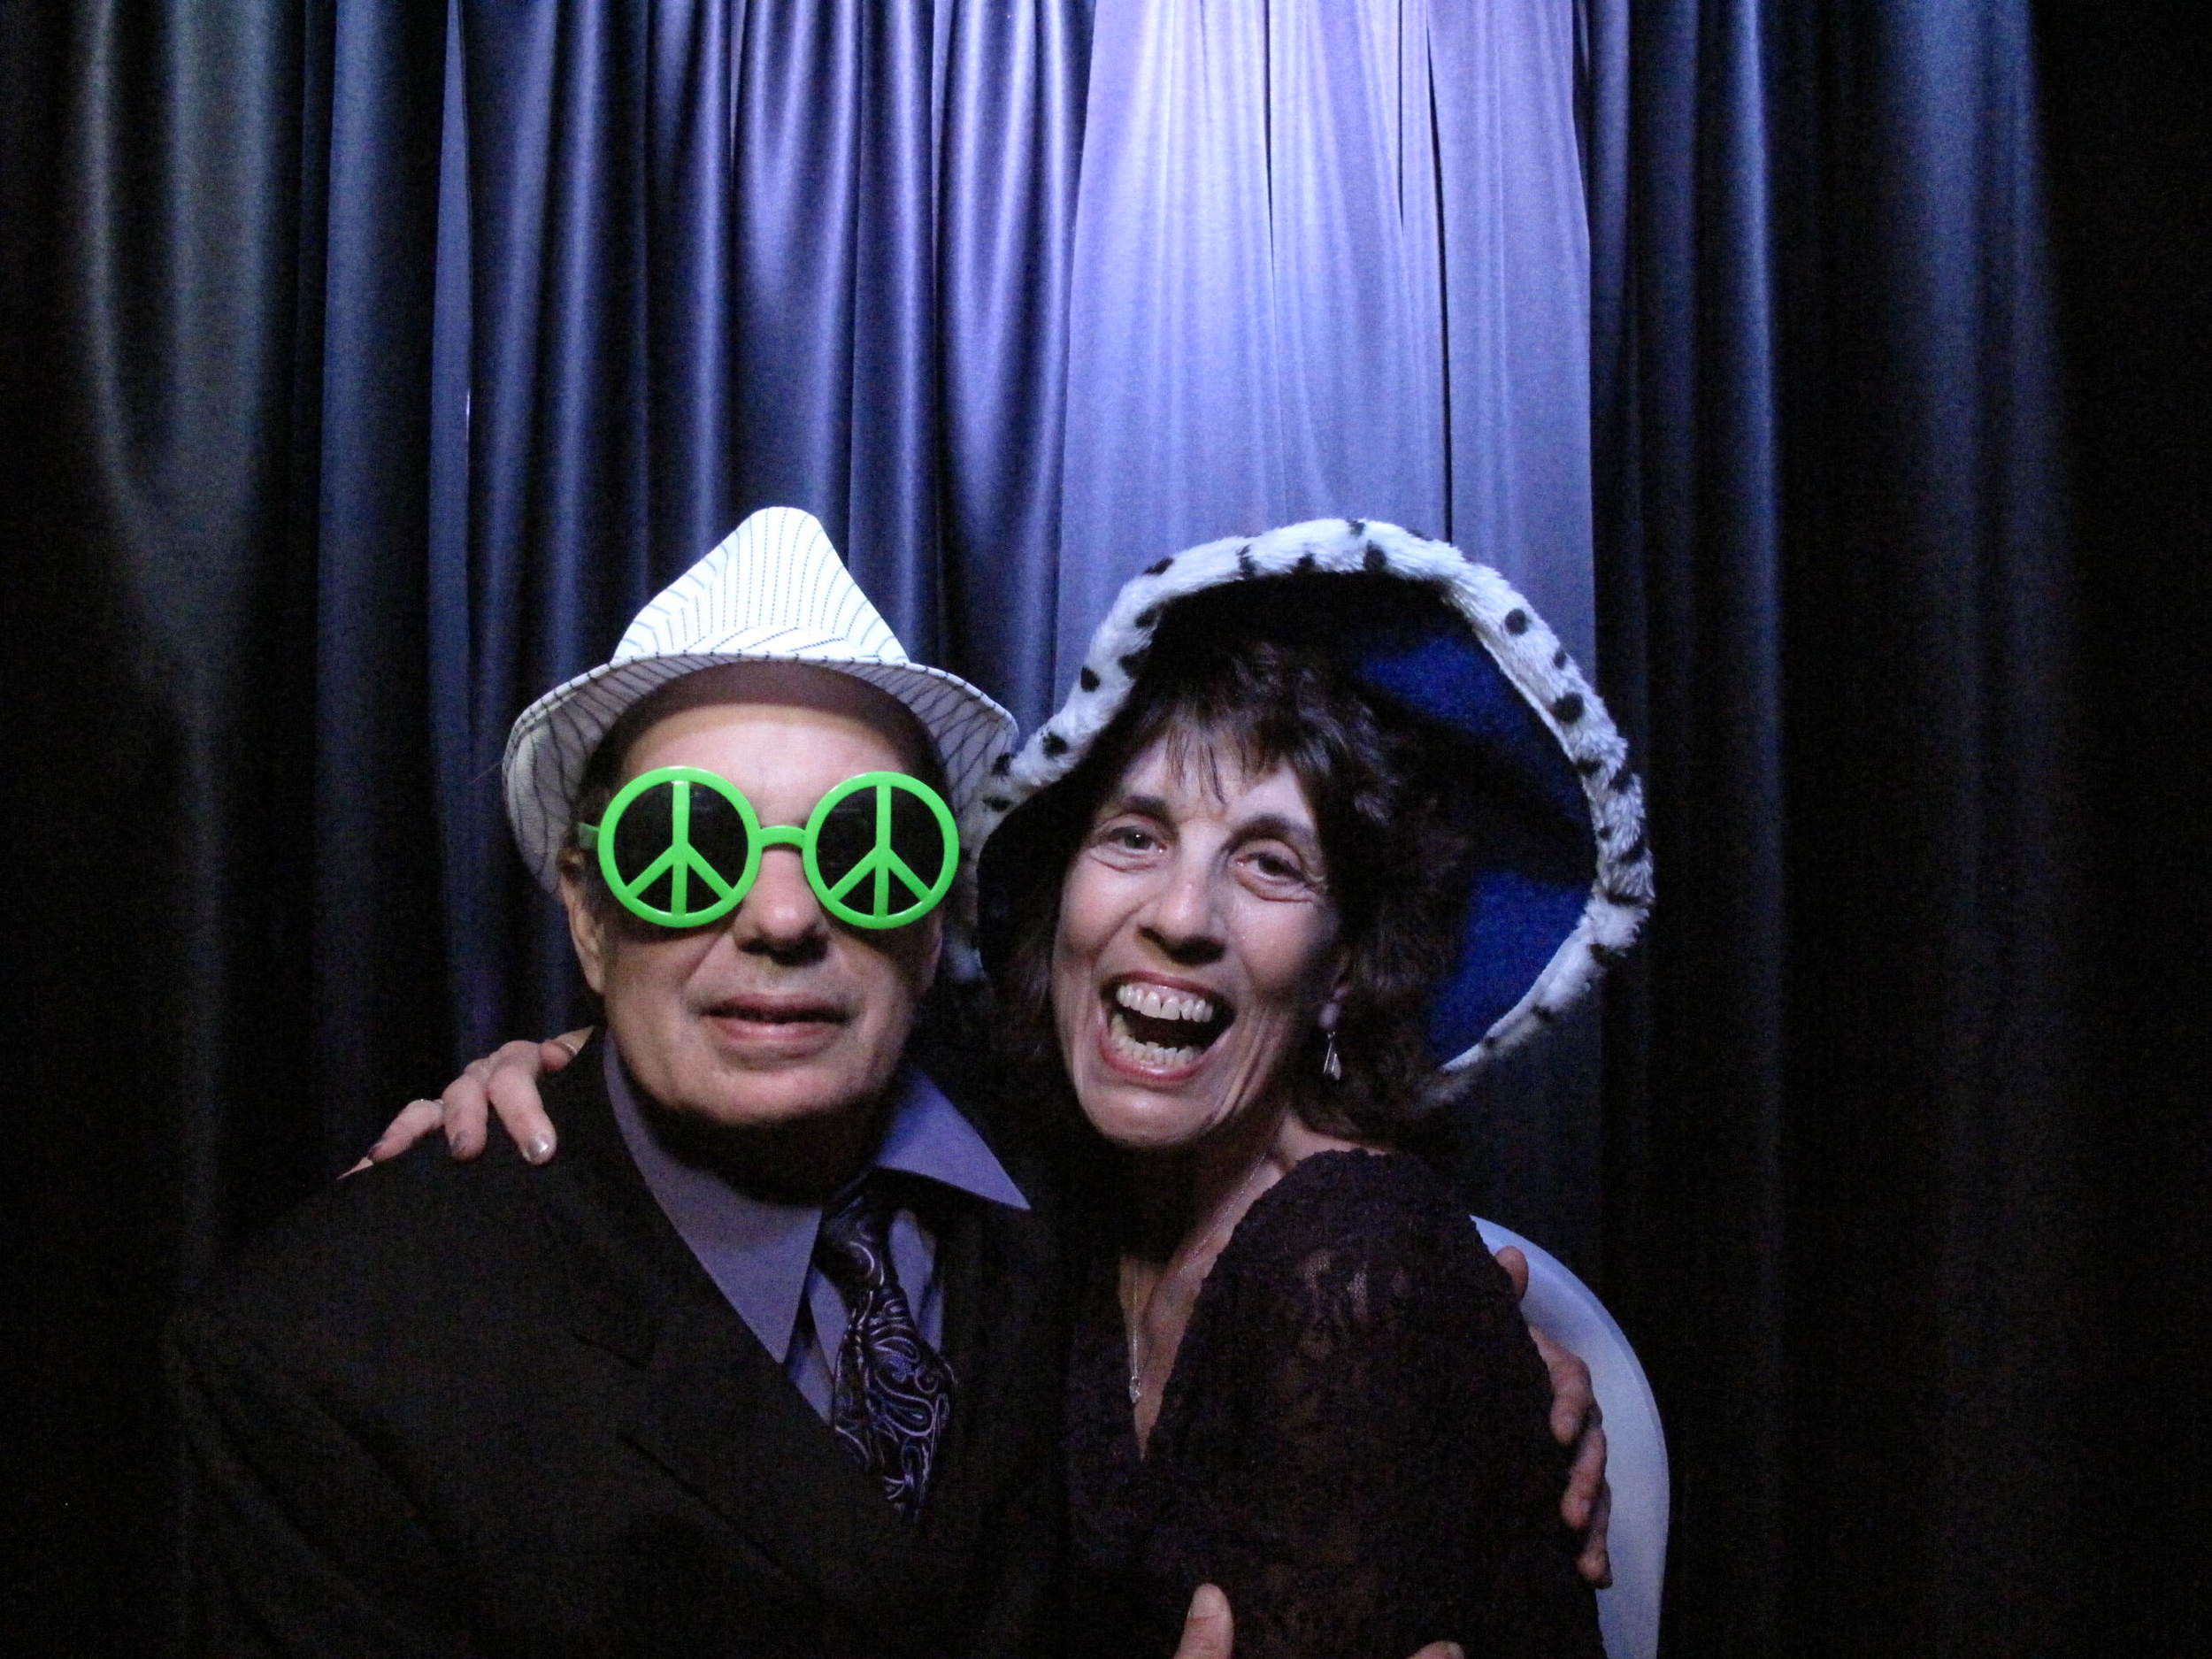 Snapshot Photobooths at the Windsor Ballroom at the Holiday Inn in East Windsor, New Jersey